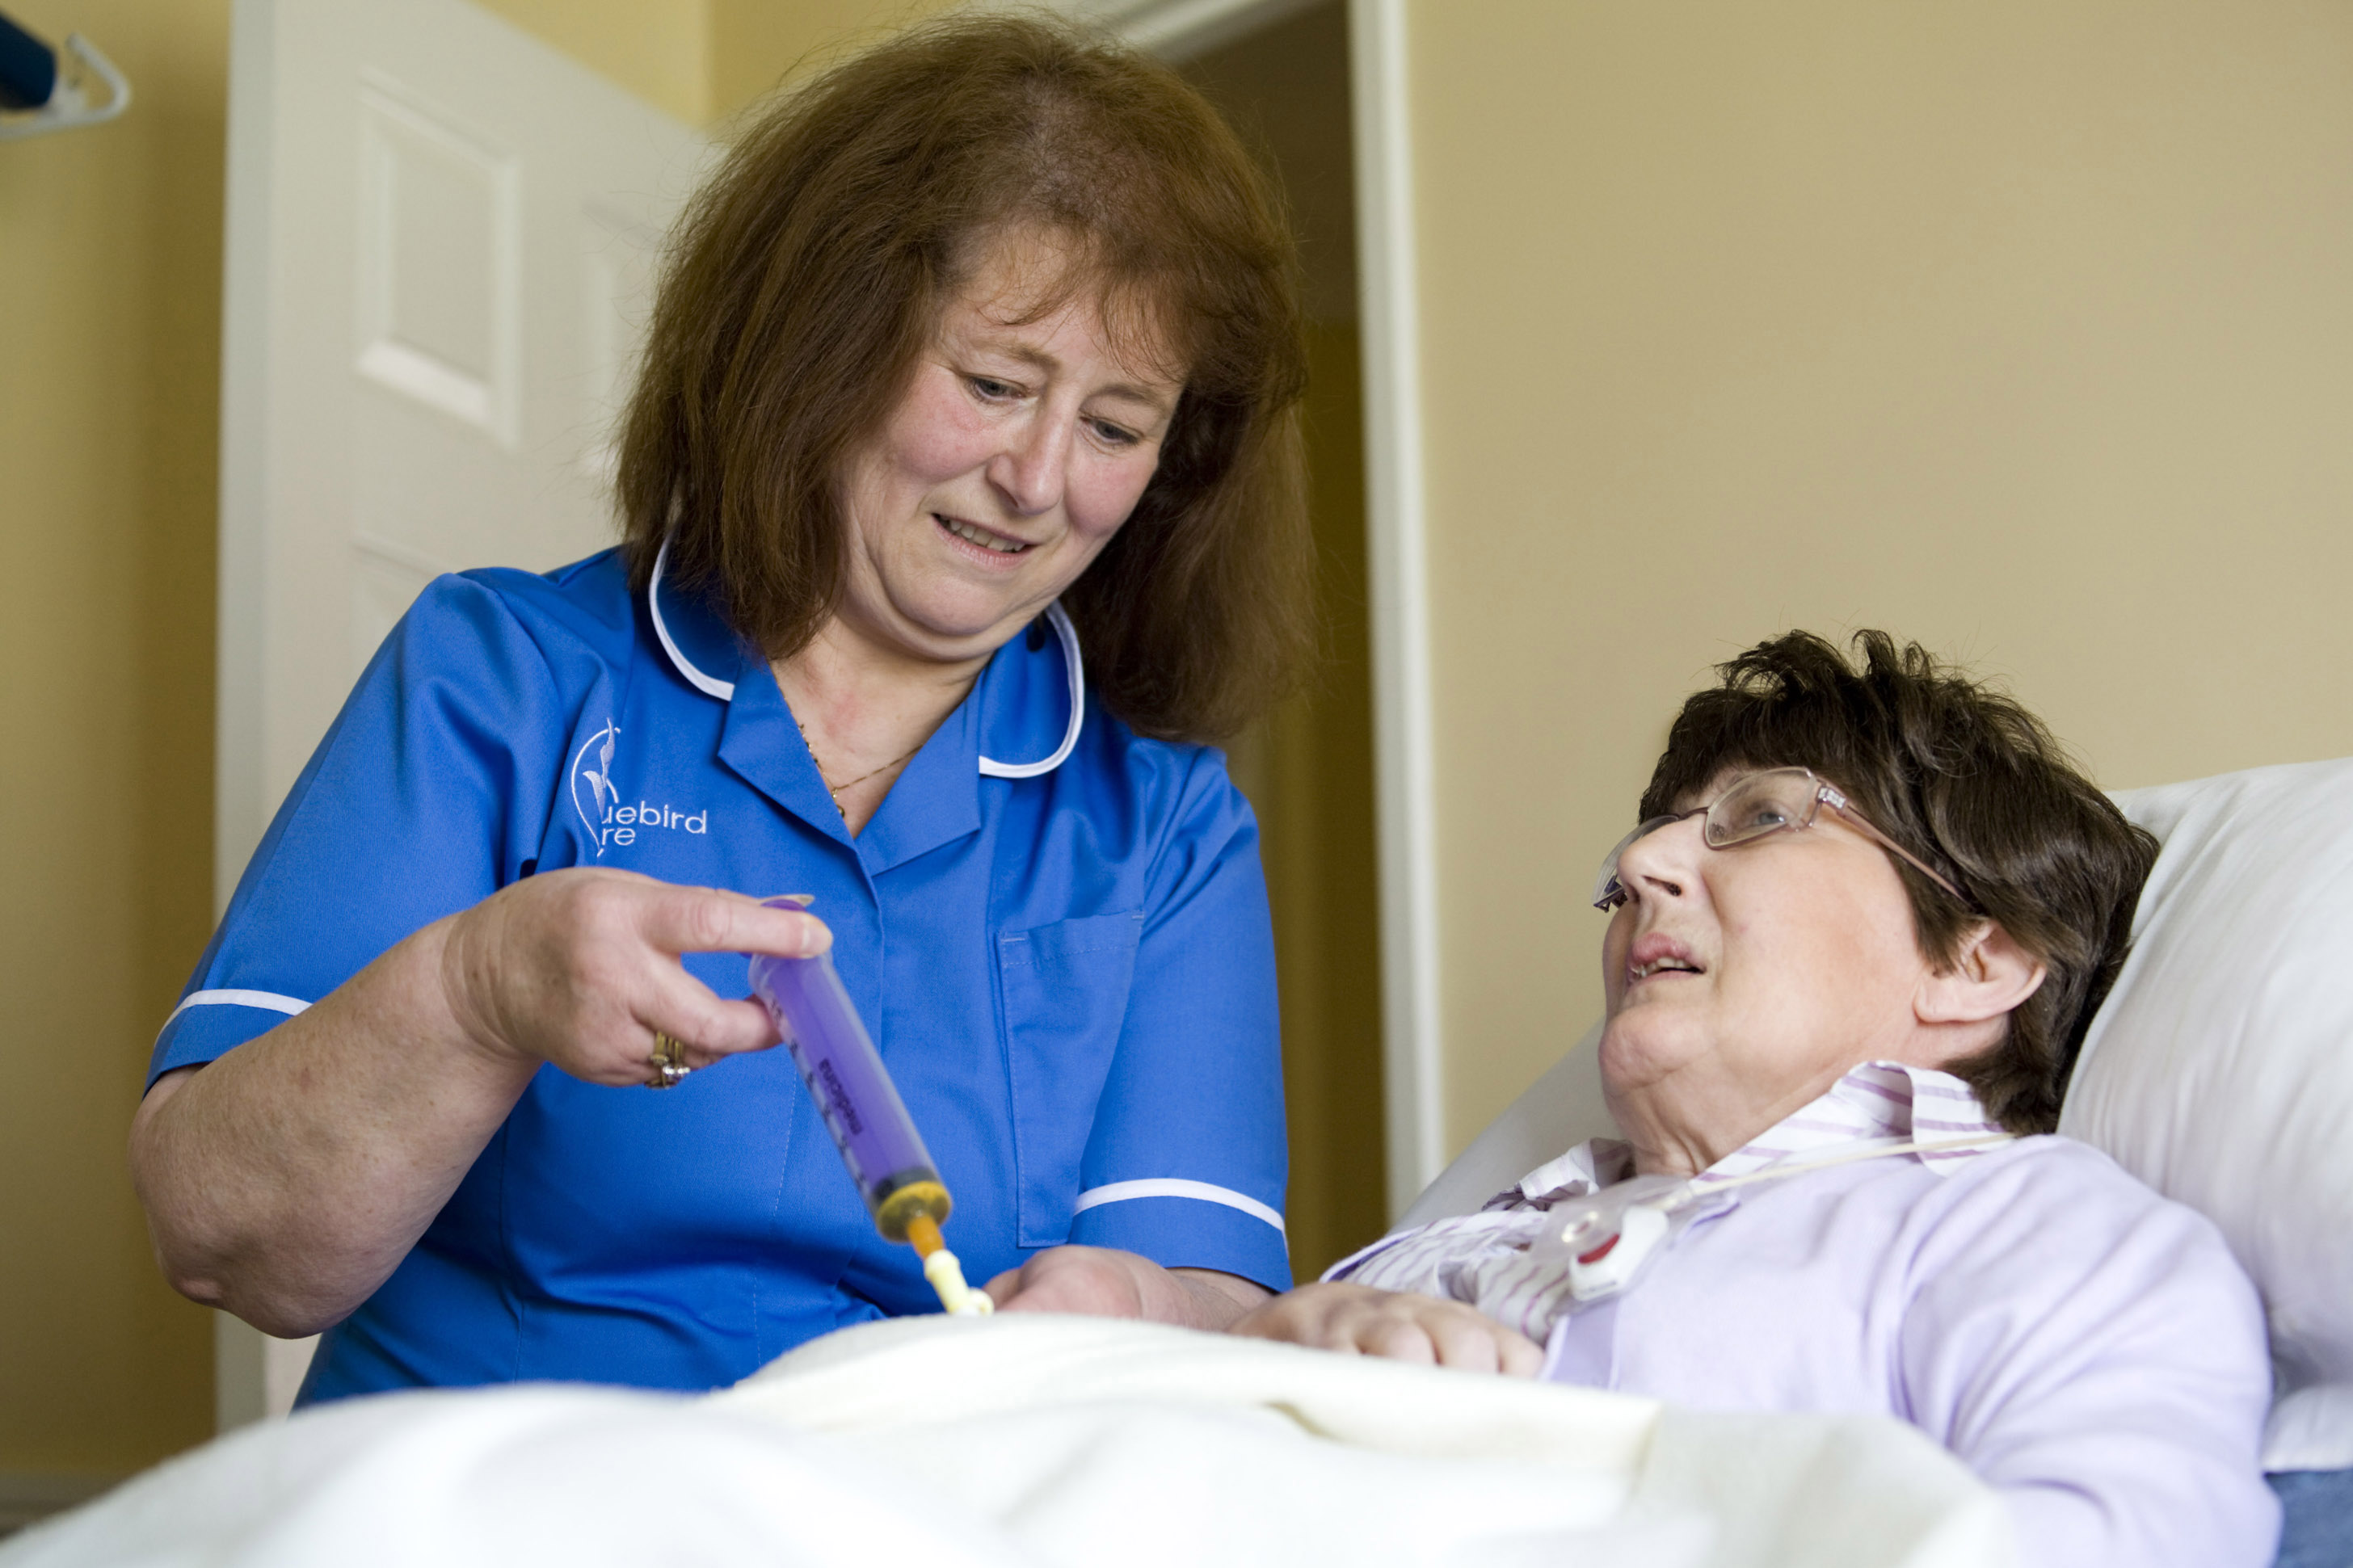 Home care, complex care in bed